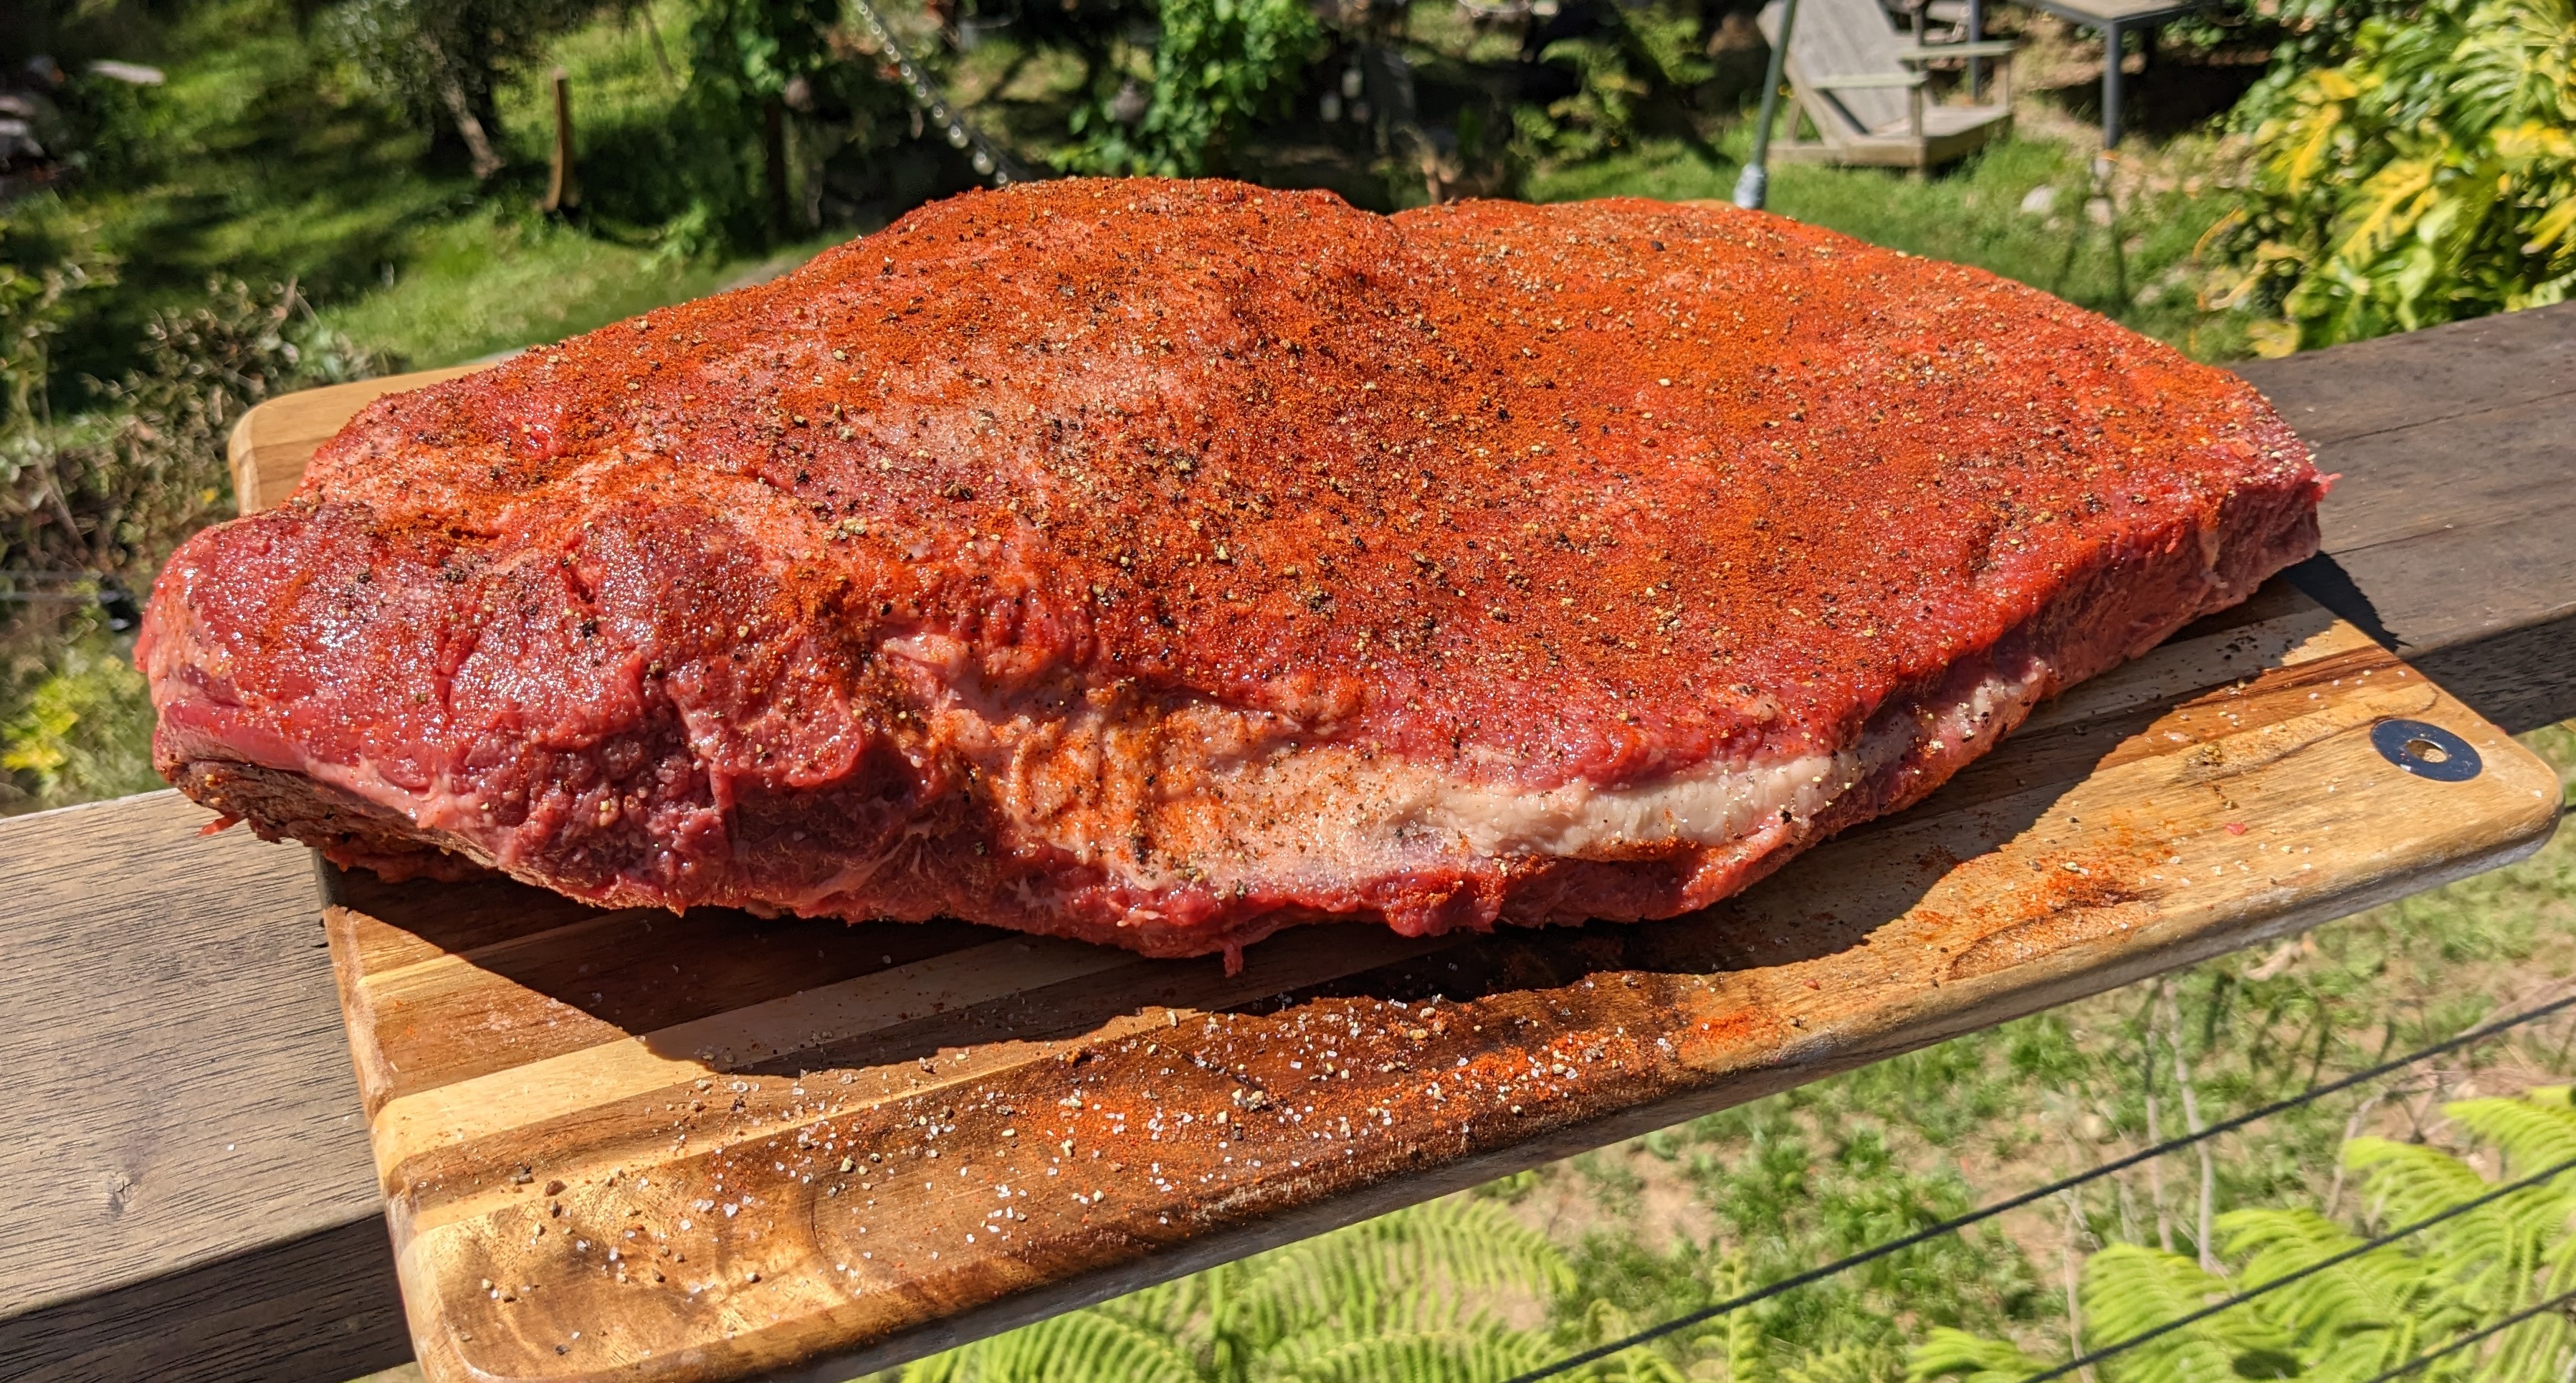 Do you need a water pan when smoking brisket? Absolutely!